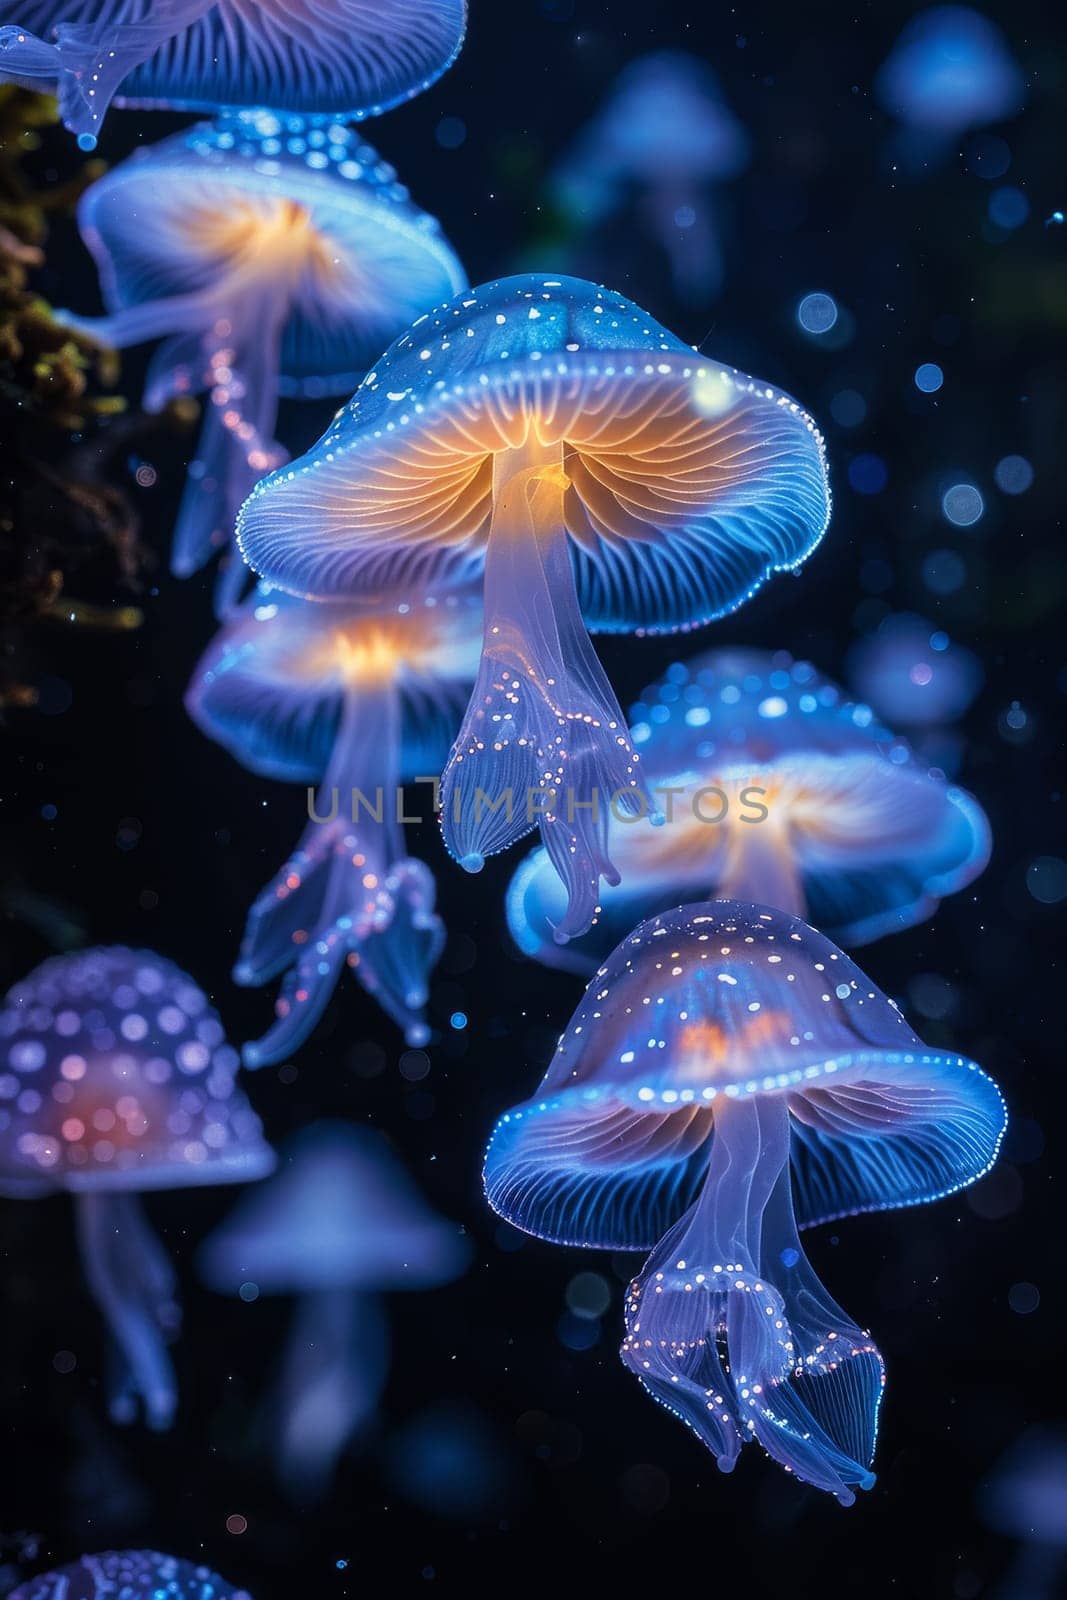 Three jellyfish are floating in the dark blue water. The jellyfish are illuminated by a light source, creating a beautiful and serene atmosphere